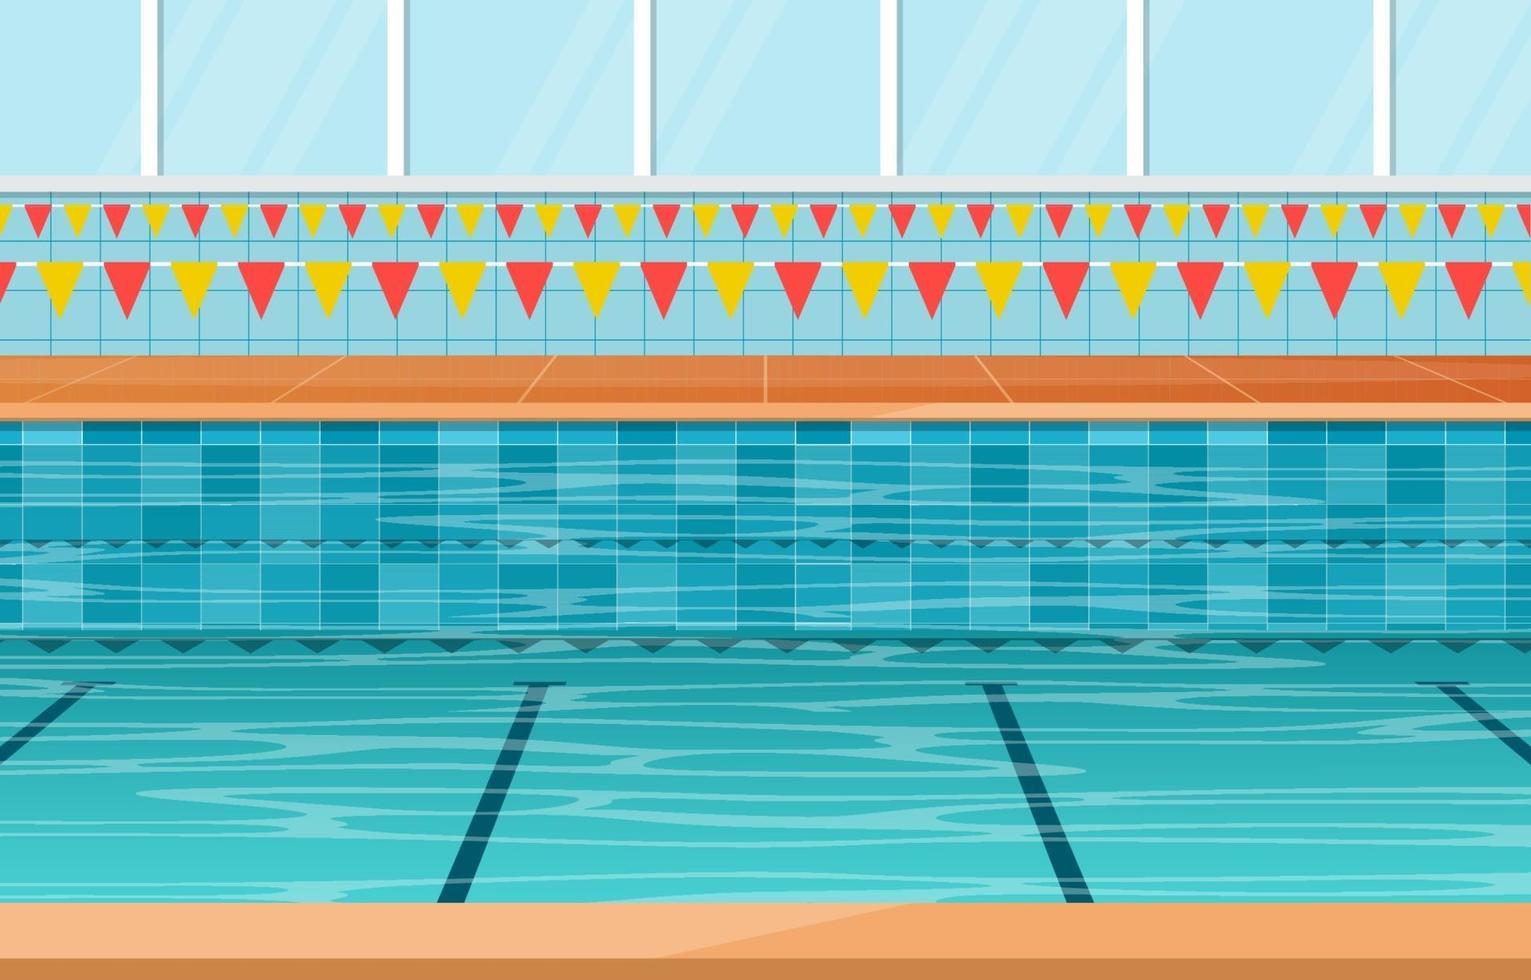 Swimming Pool with Lanes and Banners vector